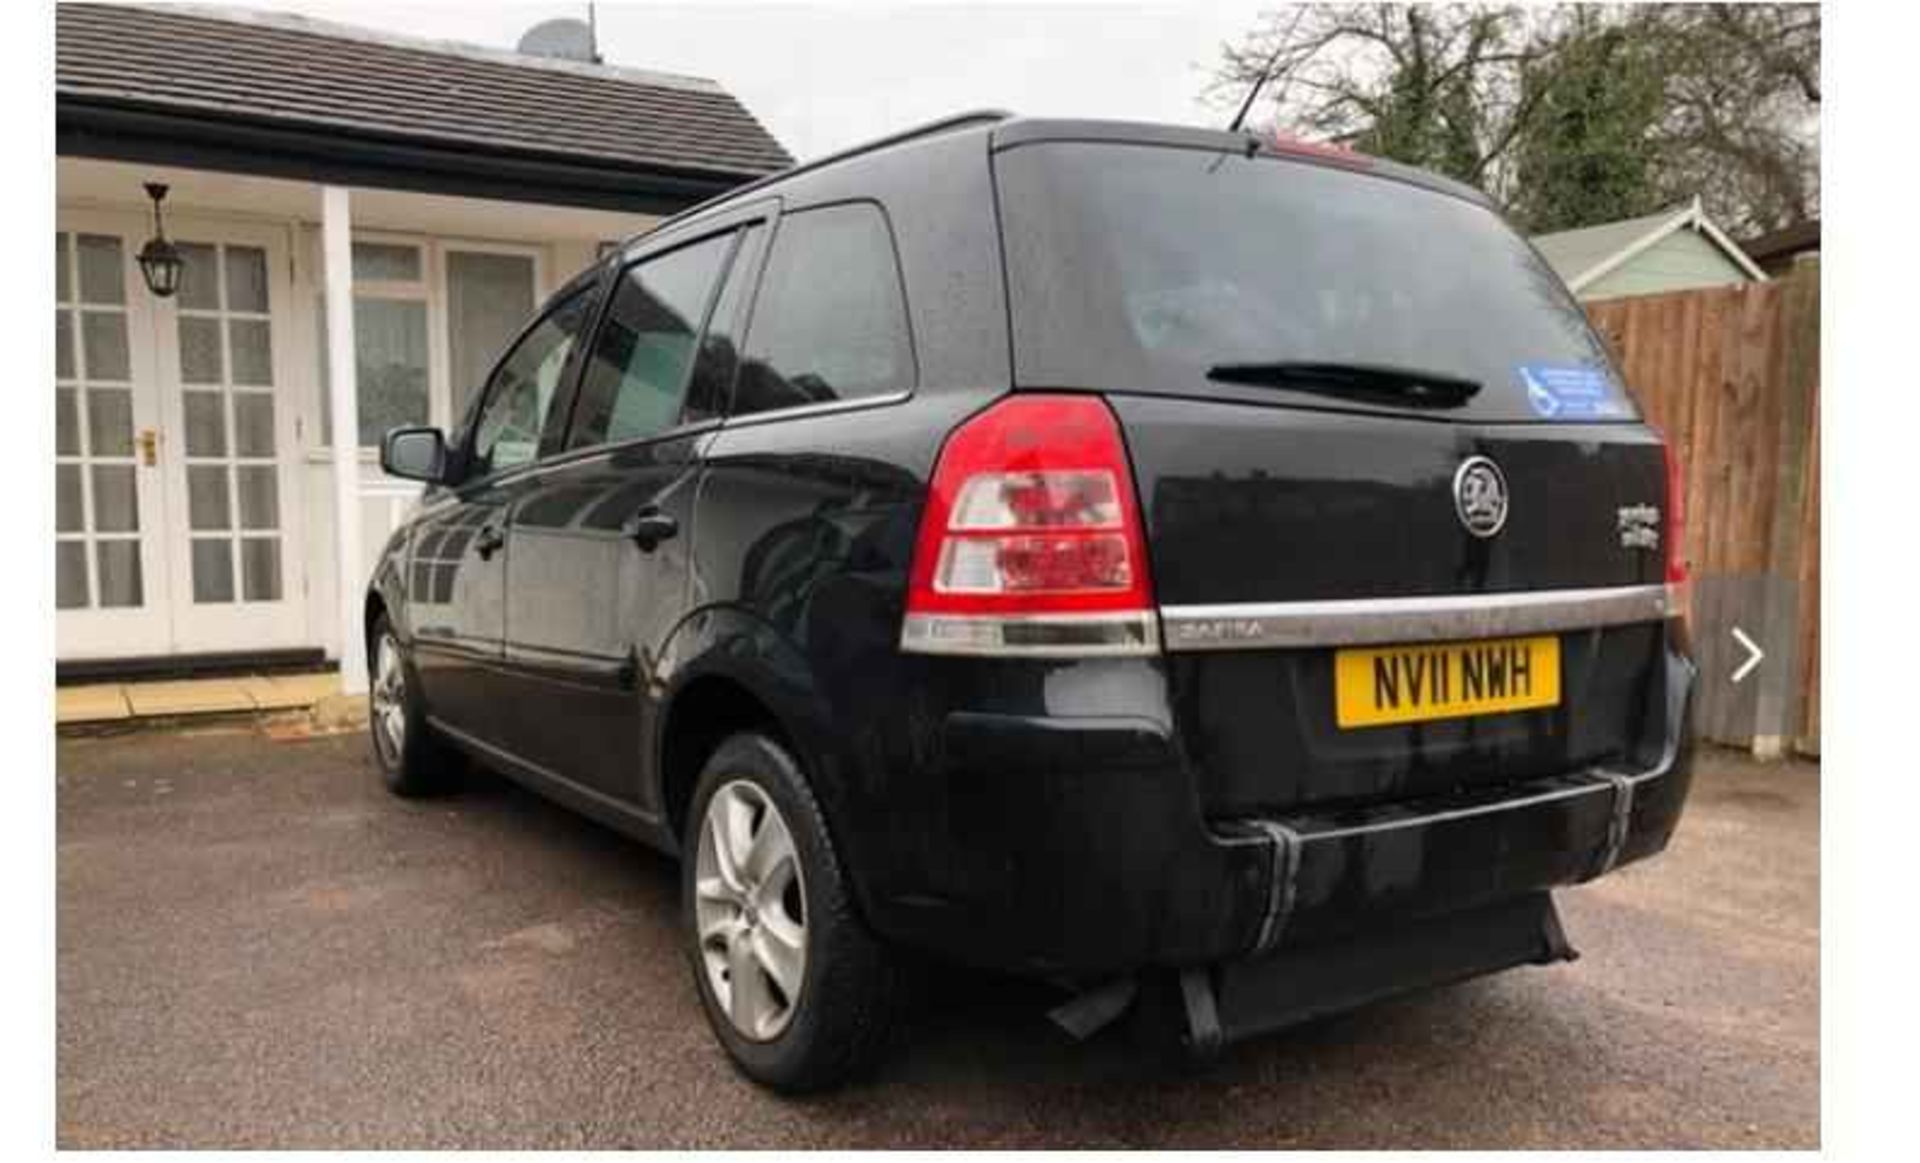 Vauxhall Zafira 1.8i Exclusive Easytronic Automatic Gearbox Wheelchair / Disability Vehicle2011 - Image 2 of 8